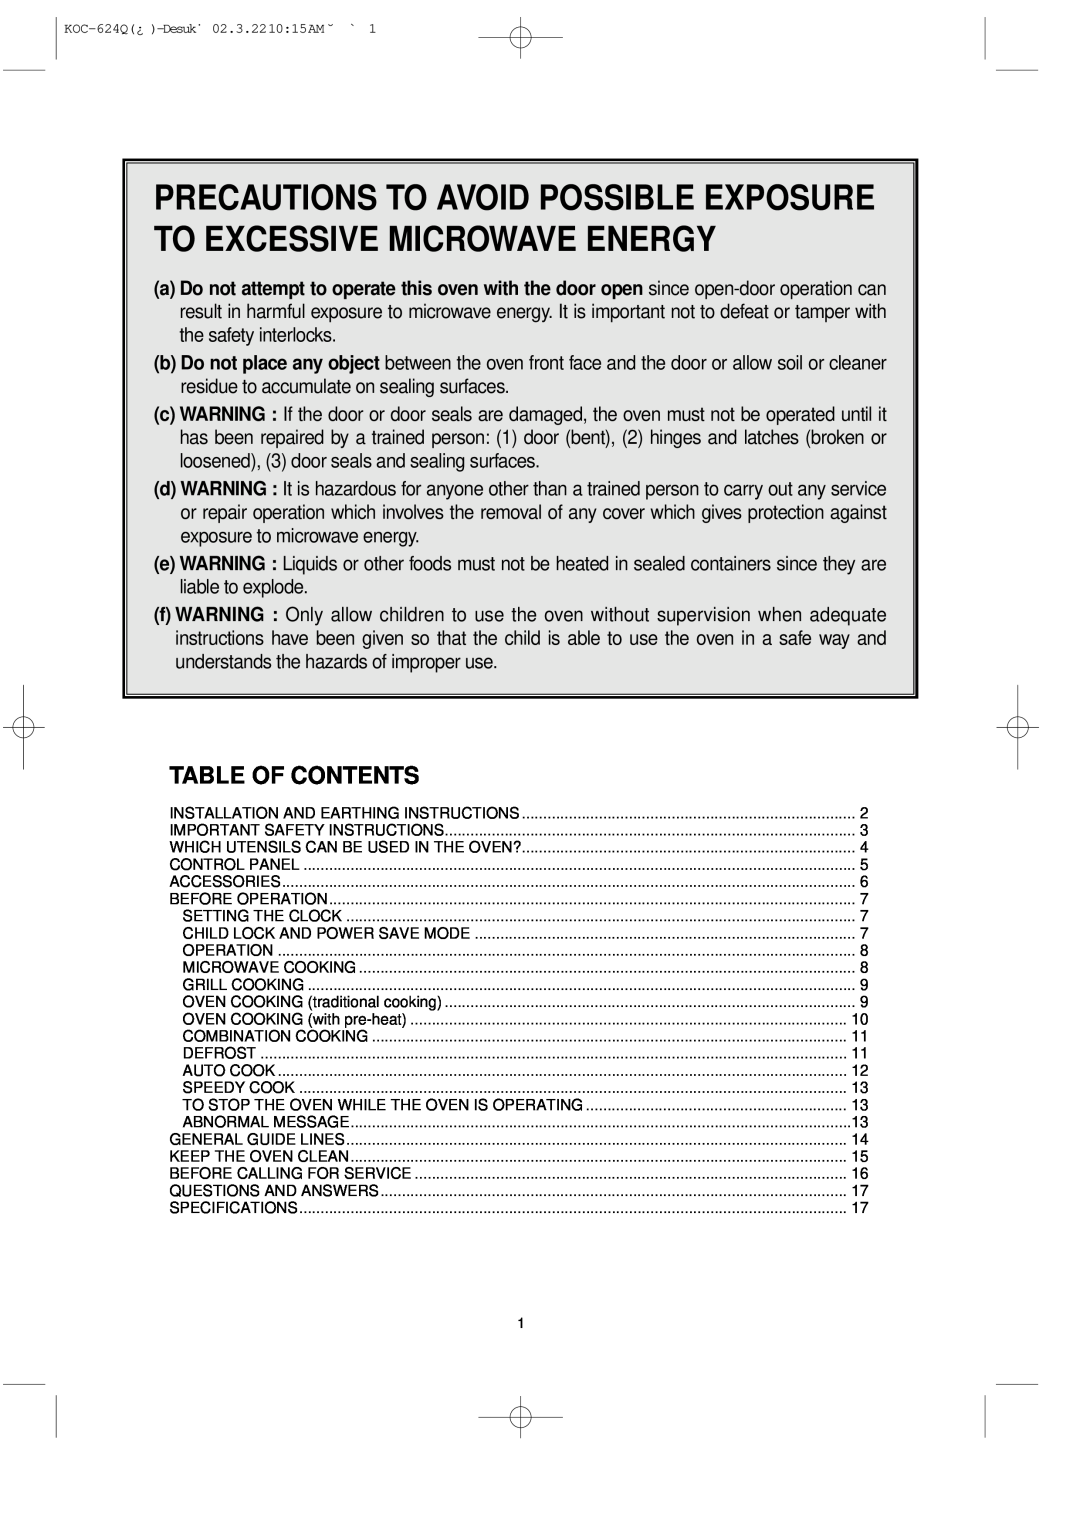 Daewoo KOC-624Q owner manual Precautions To Avoid Possible Exposure To Excessive Microwave Energy, Table Of Contents 